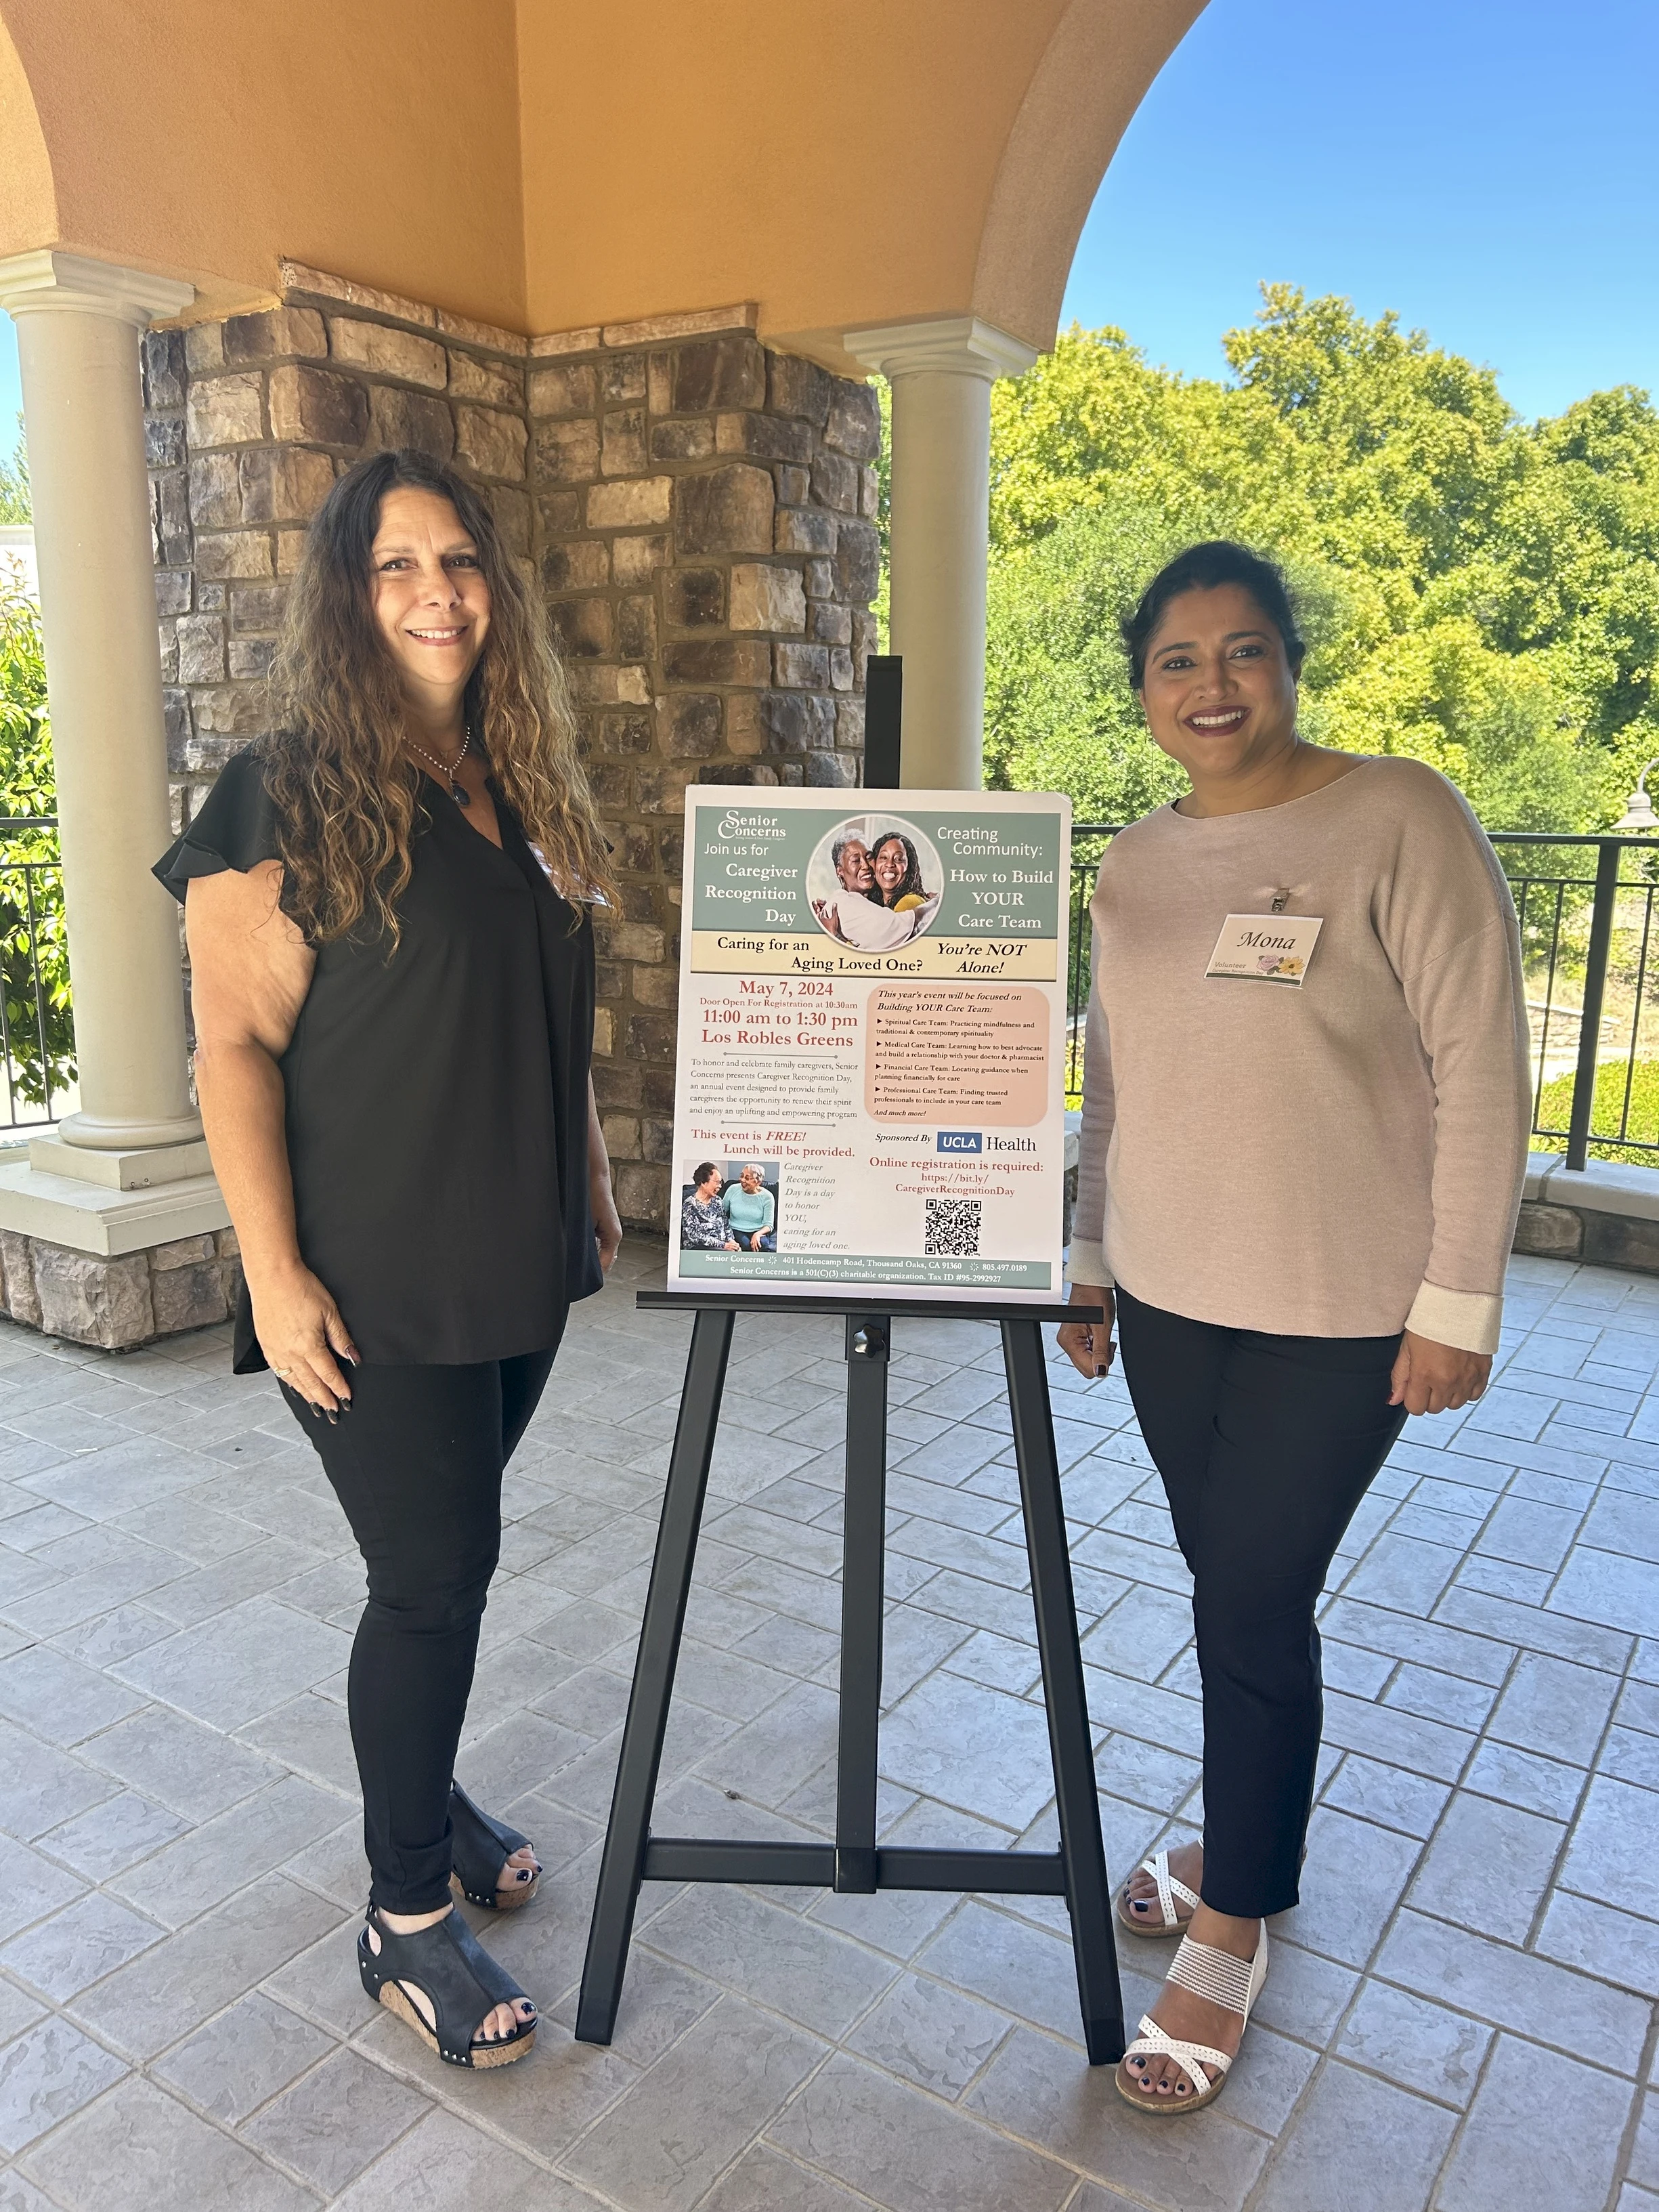 Mona and Ann volunteered at Senior Concern’s Caregiver Recognition Day to honor all family caregivers! An amazing opportunity to meet so many family caregivers and their heartfelt stories.